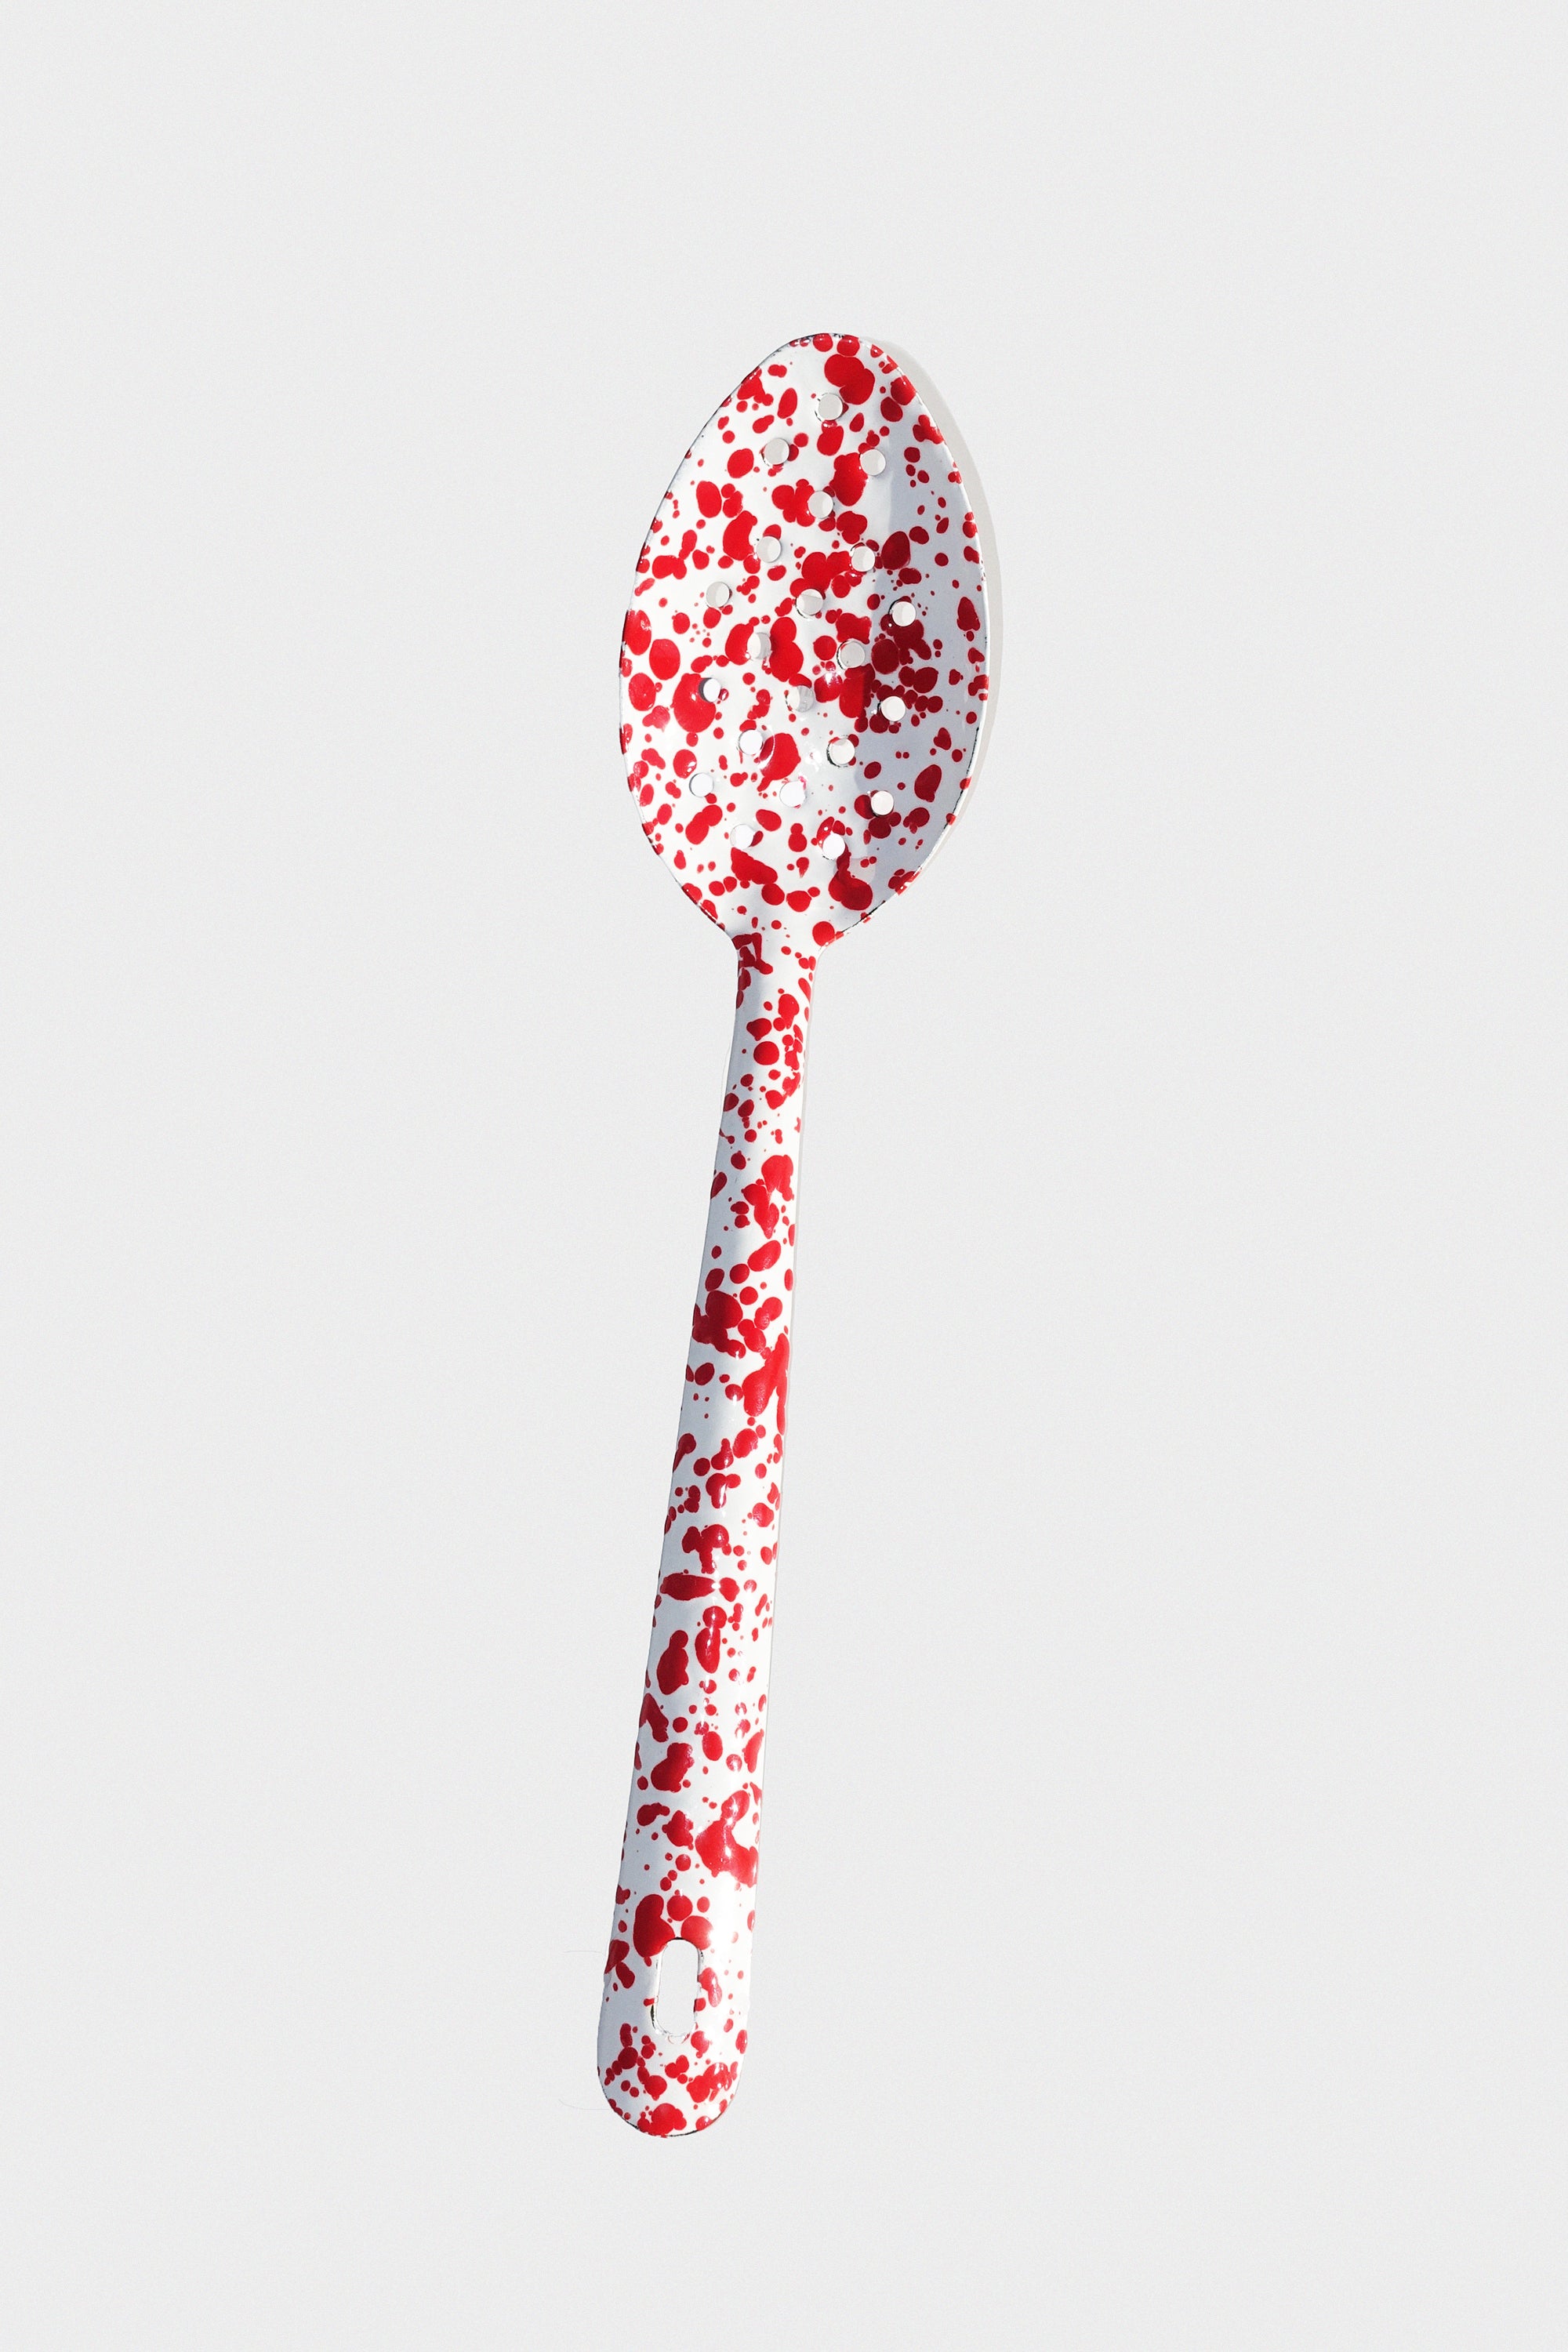 Large Slotted Spoon in Red Splatter